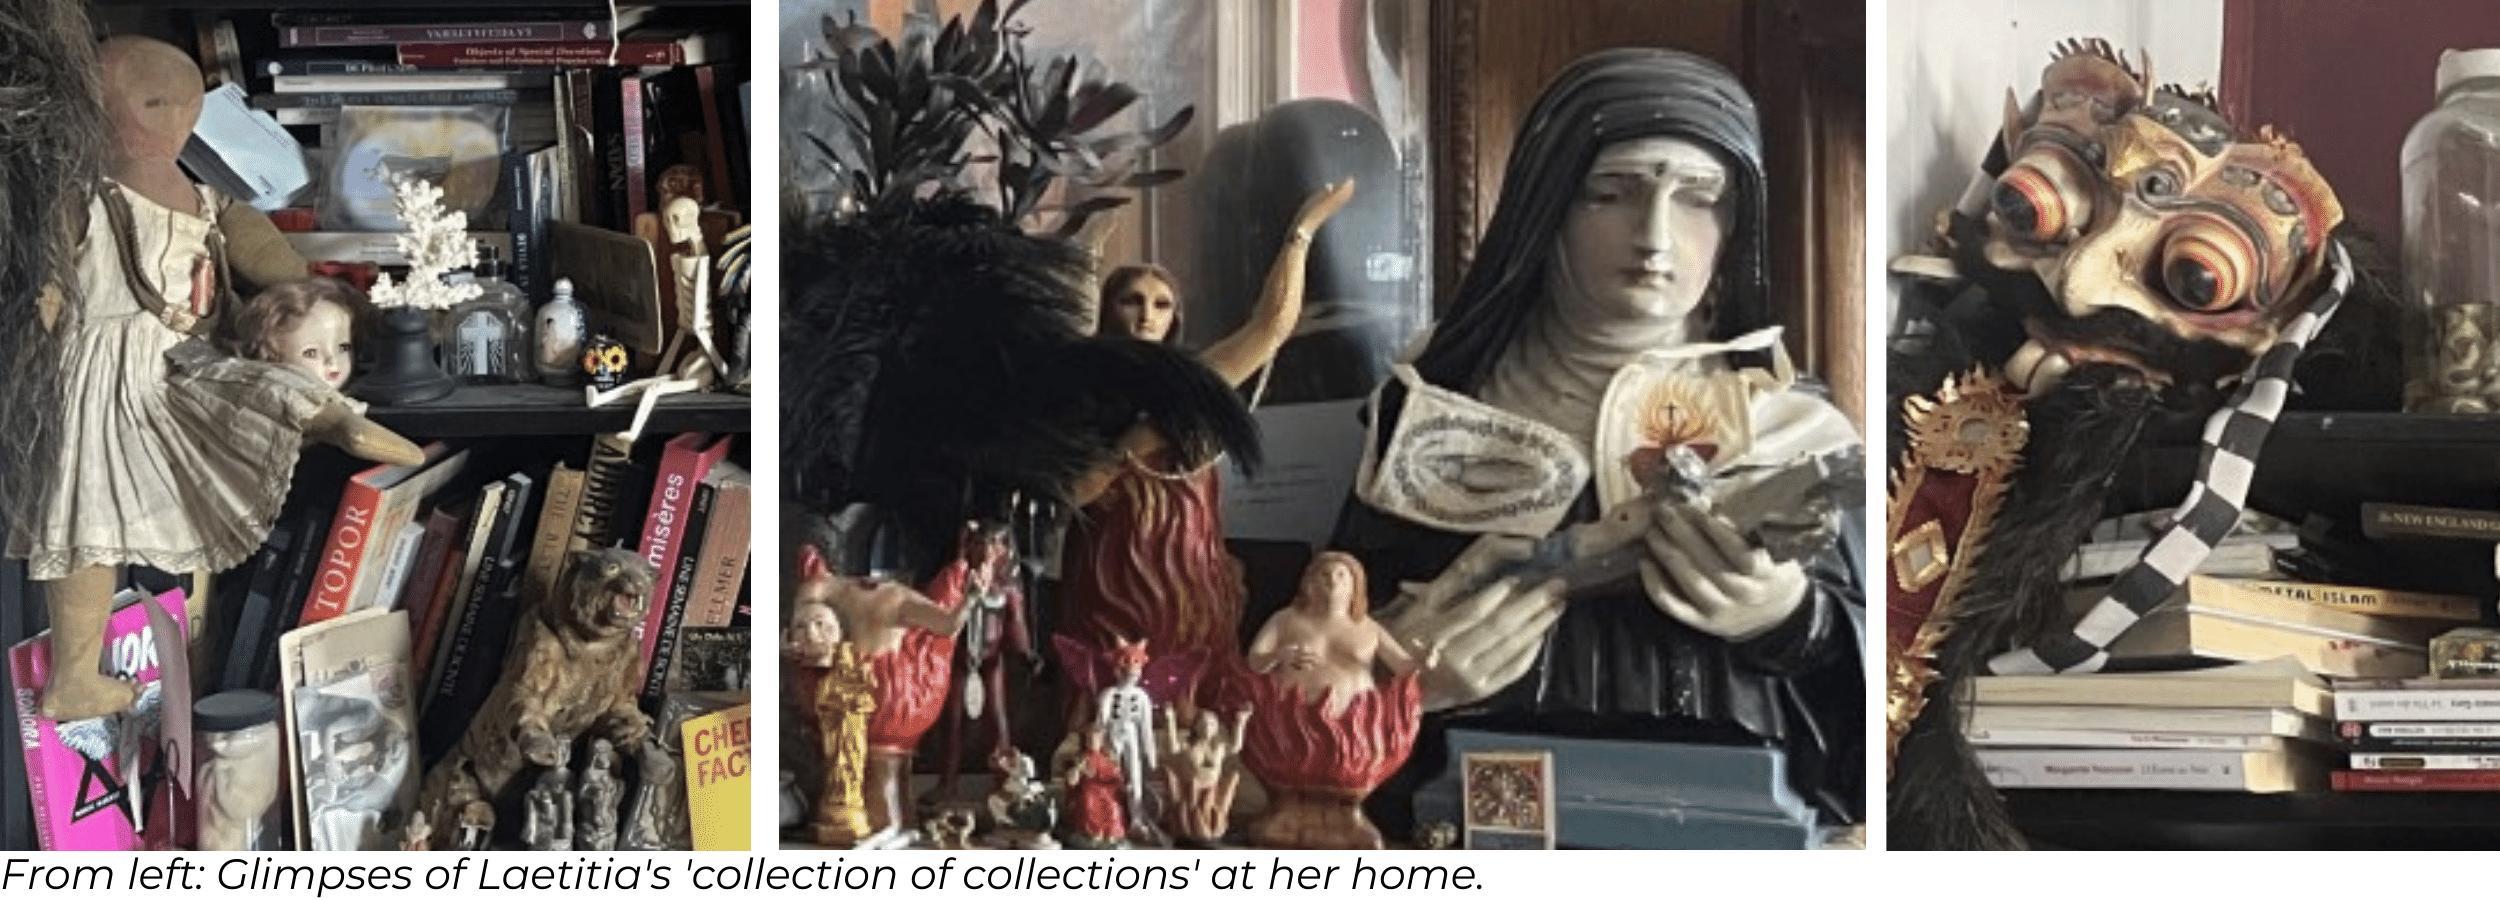 More treasures from the home of Morbid Anatomy's Laetitia Barbier